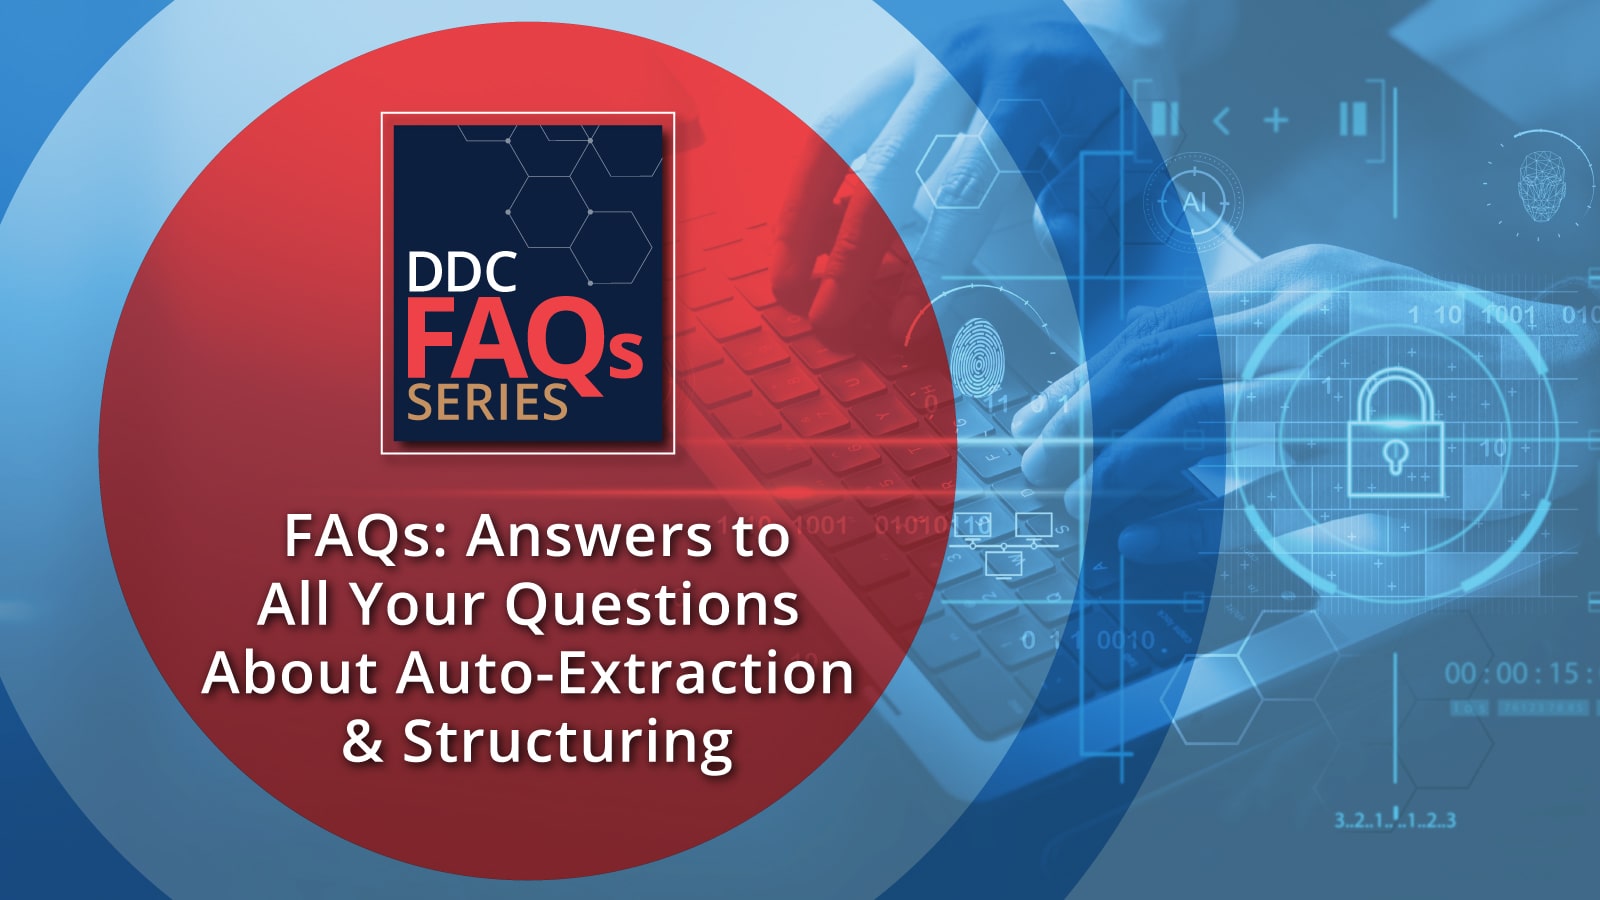 FAQs: Answers to All Your Questions About Auto-Extraction & Structuring